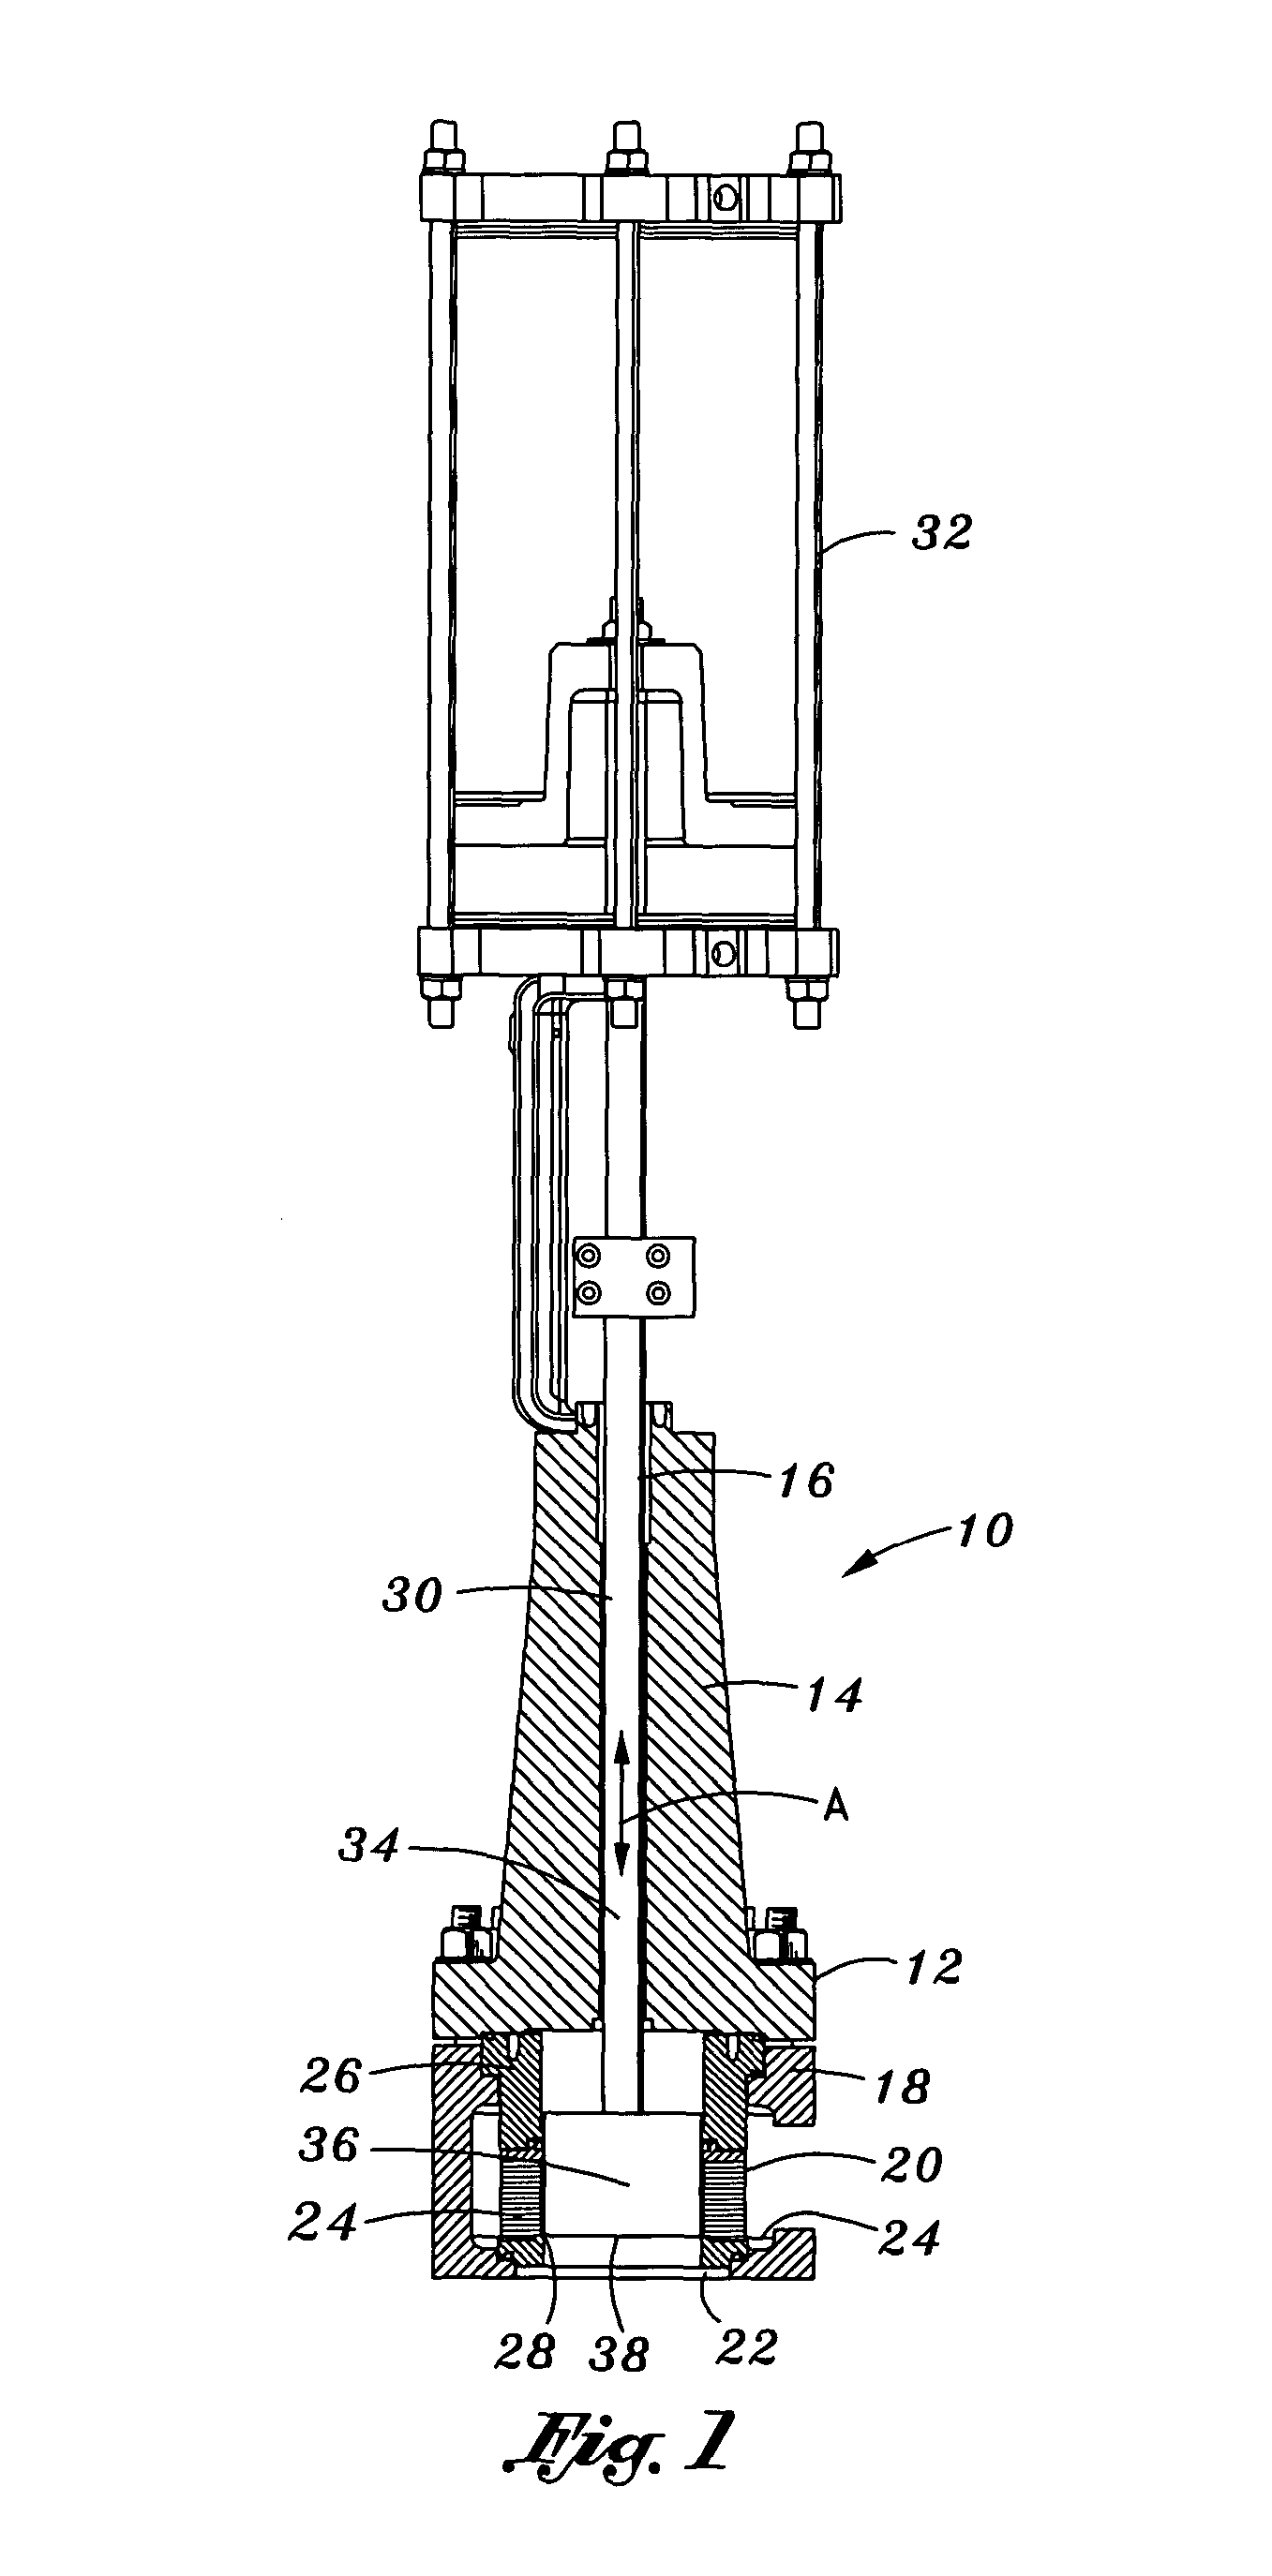 Fluid control device and method of making it